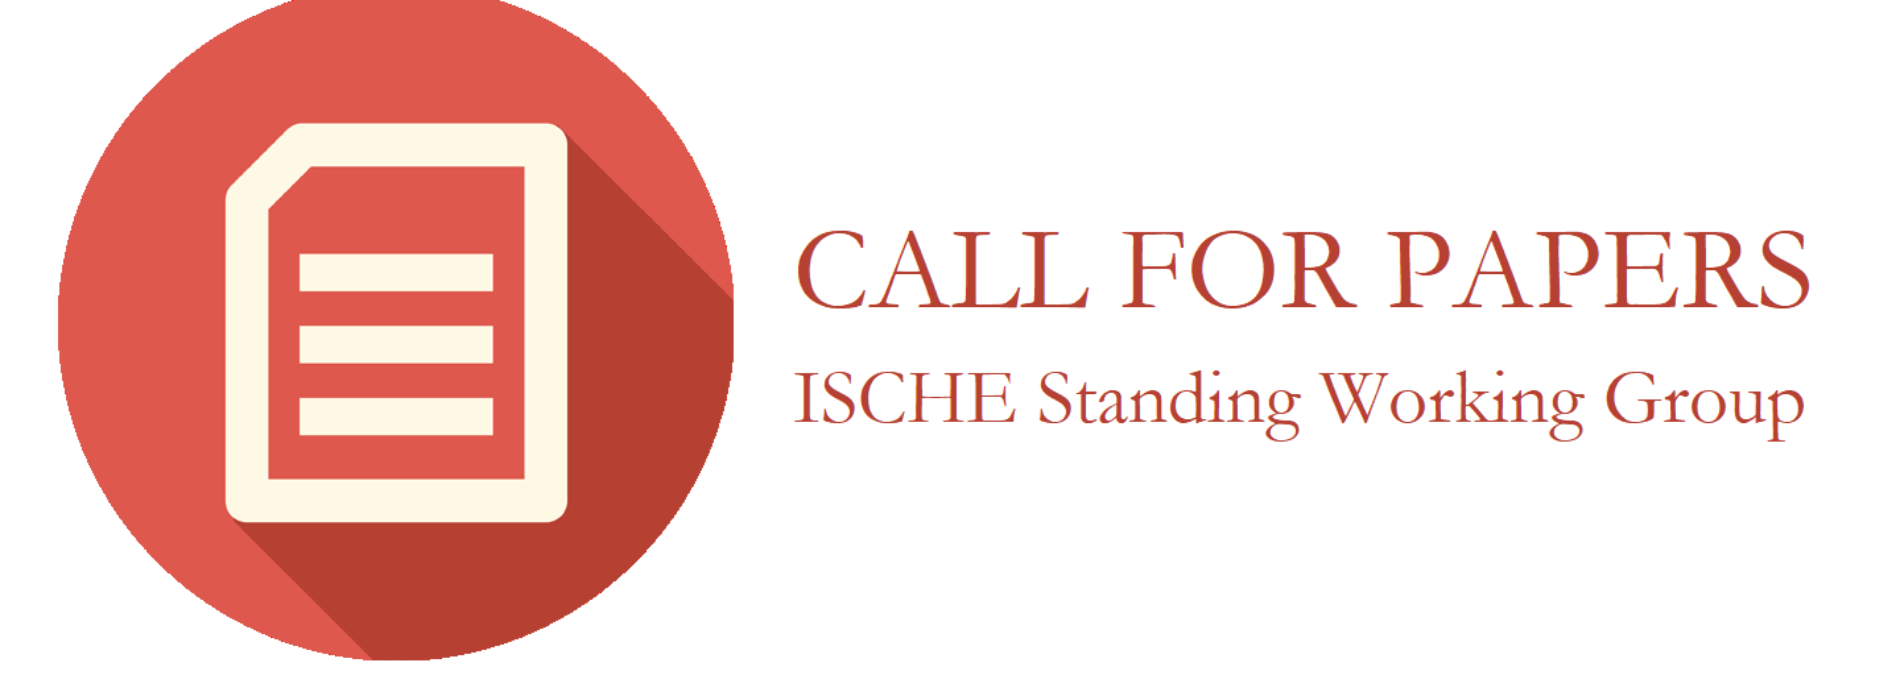 Laic Education SWG invites submissions for ISCHE 39 Conference. Deadline: Jan. 31, 2017